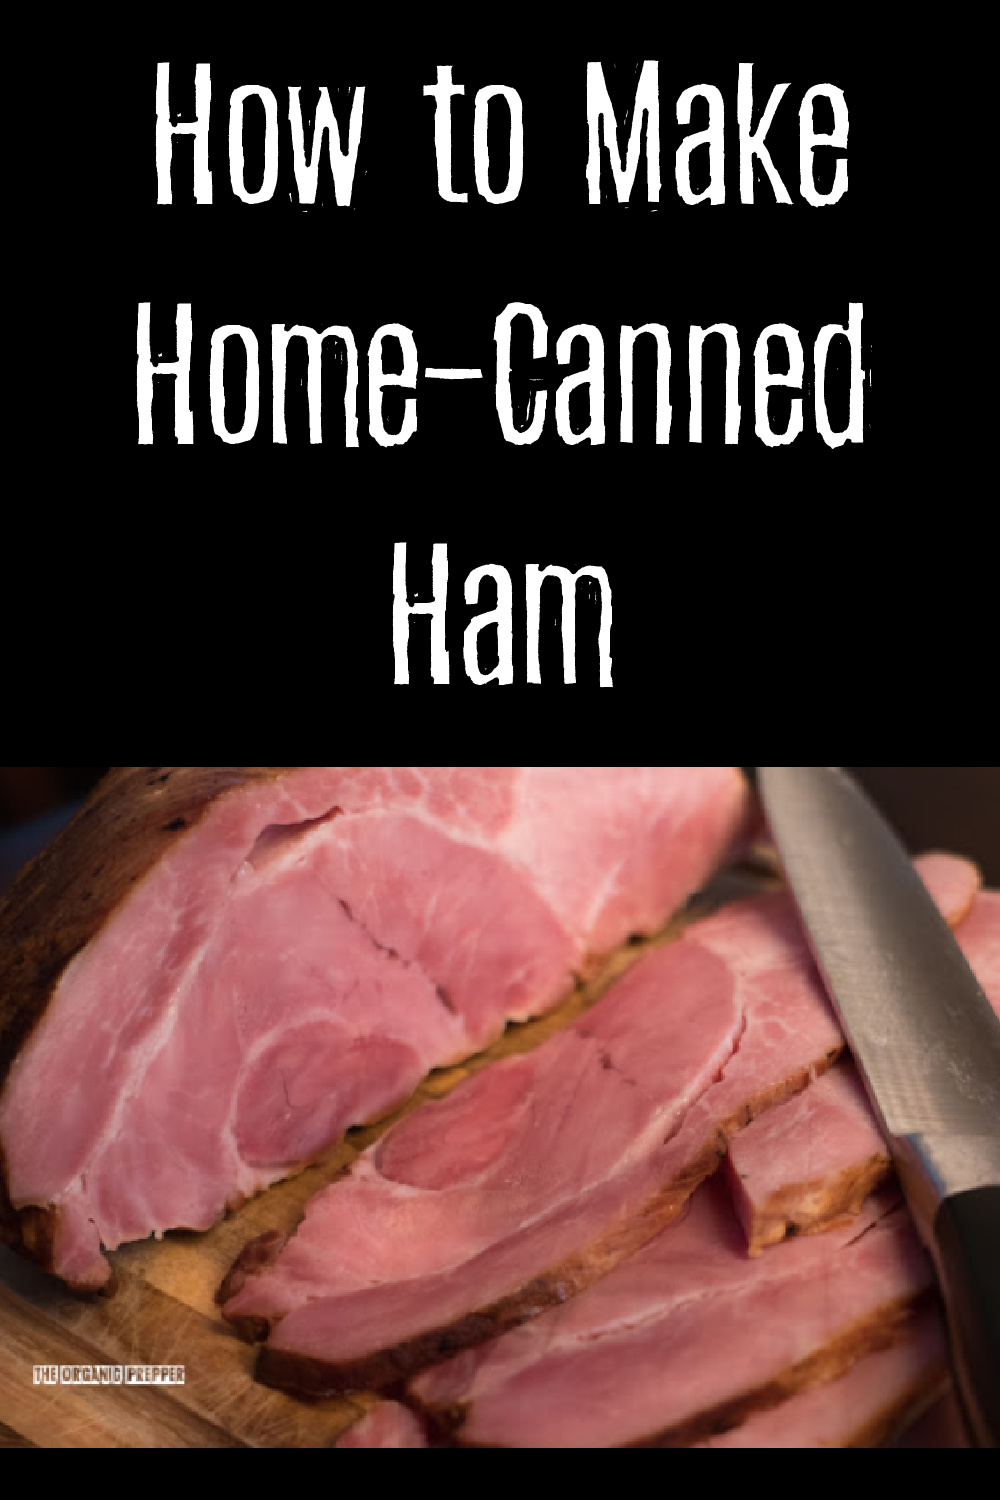 How to Make Home Canned Ham